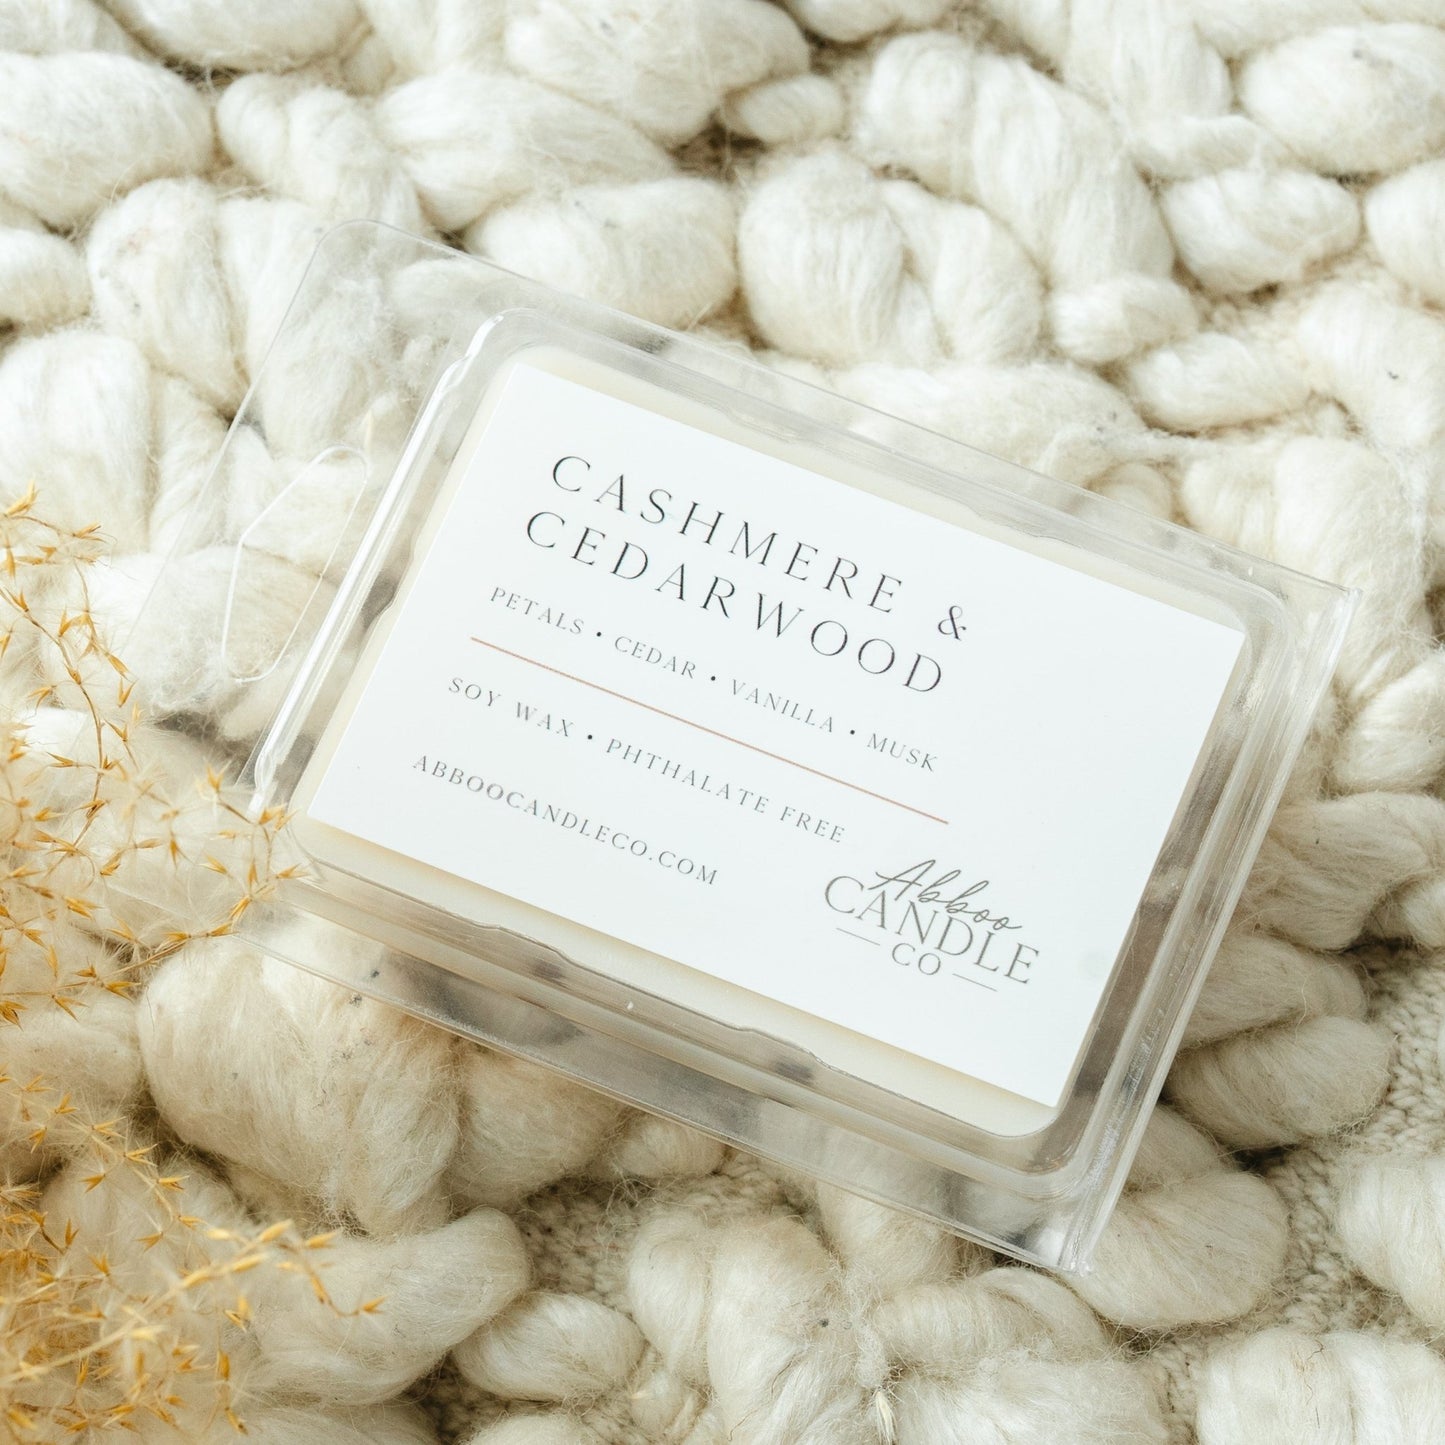 Cashmere and Cedarwood Soy Wax Melts - Abboo Candle Co